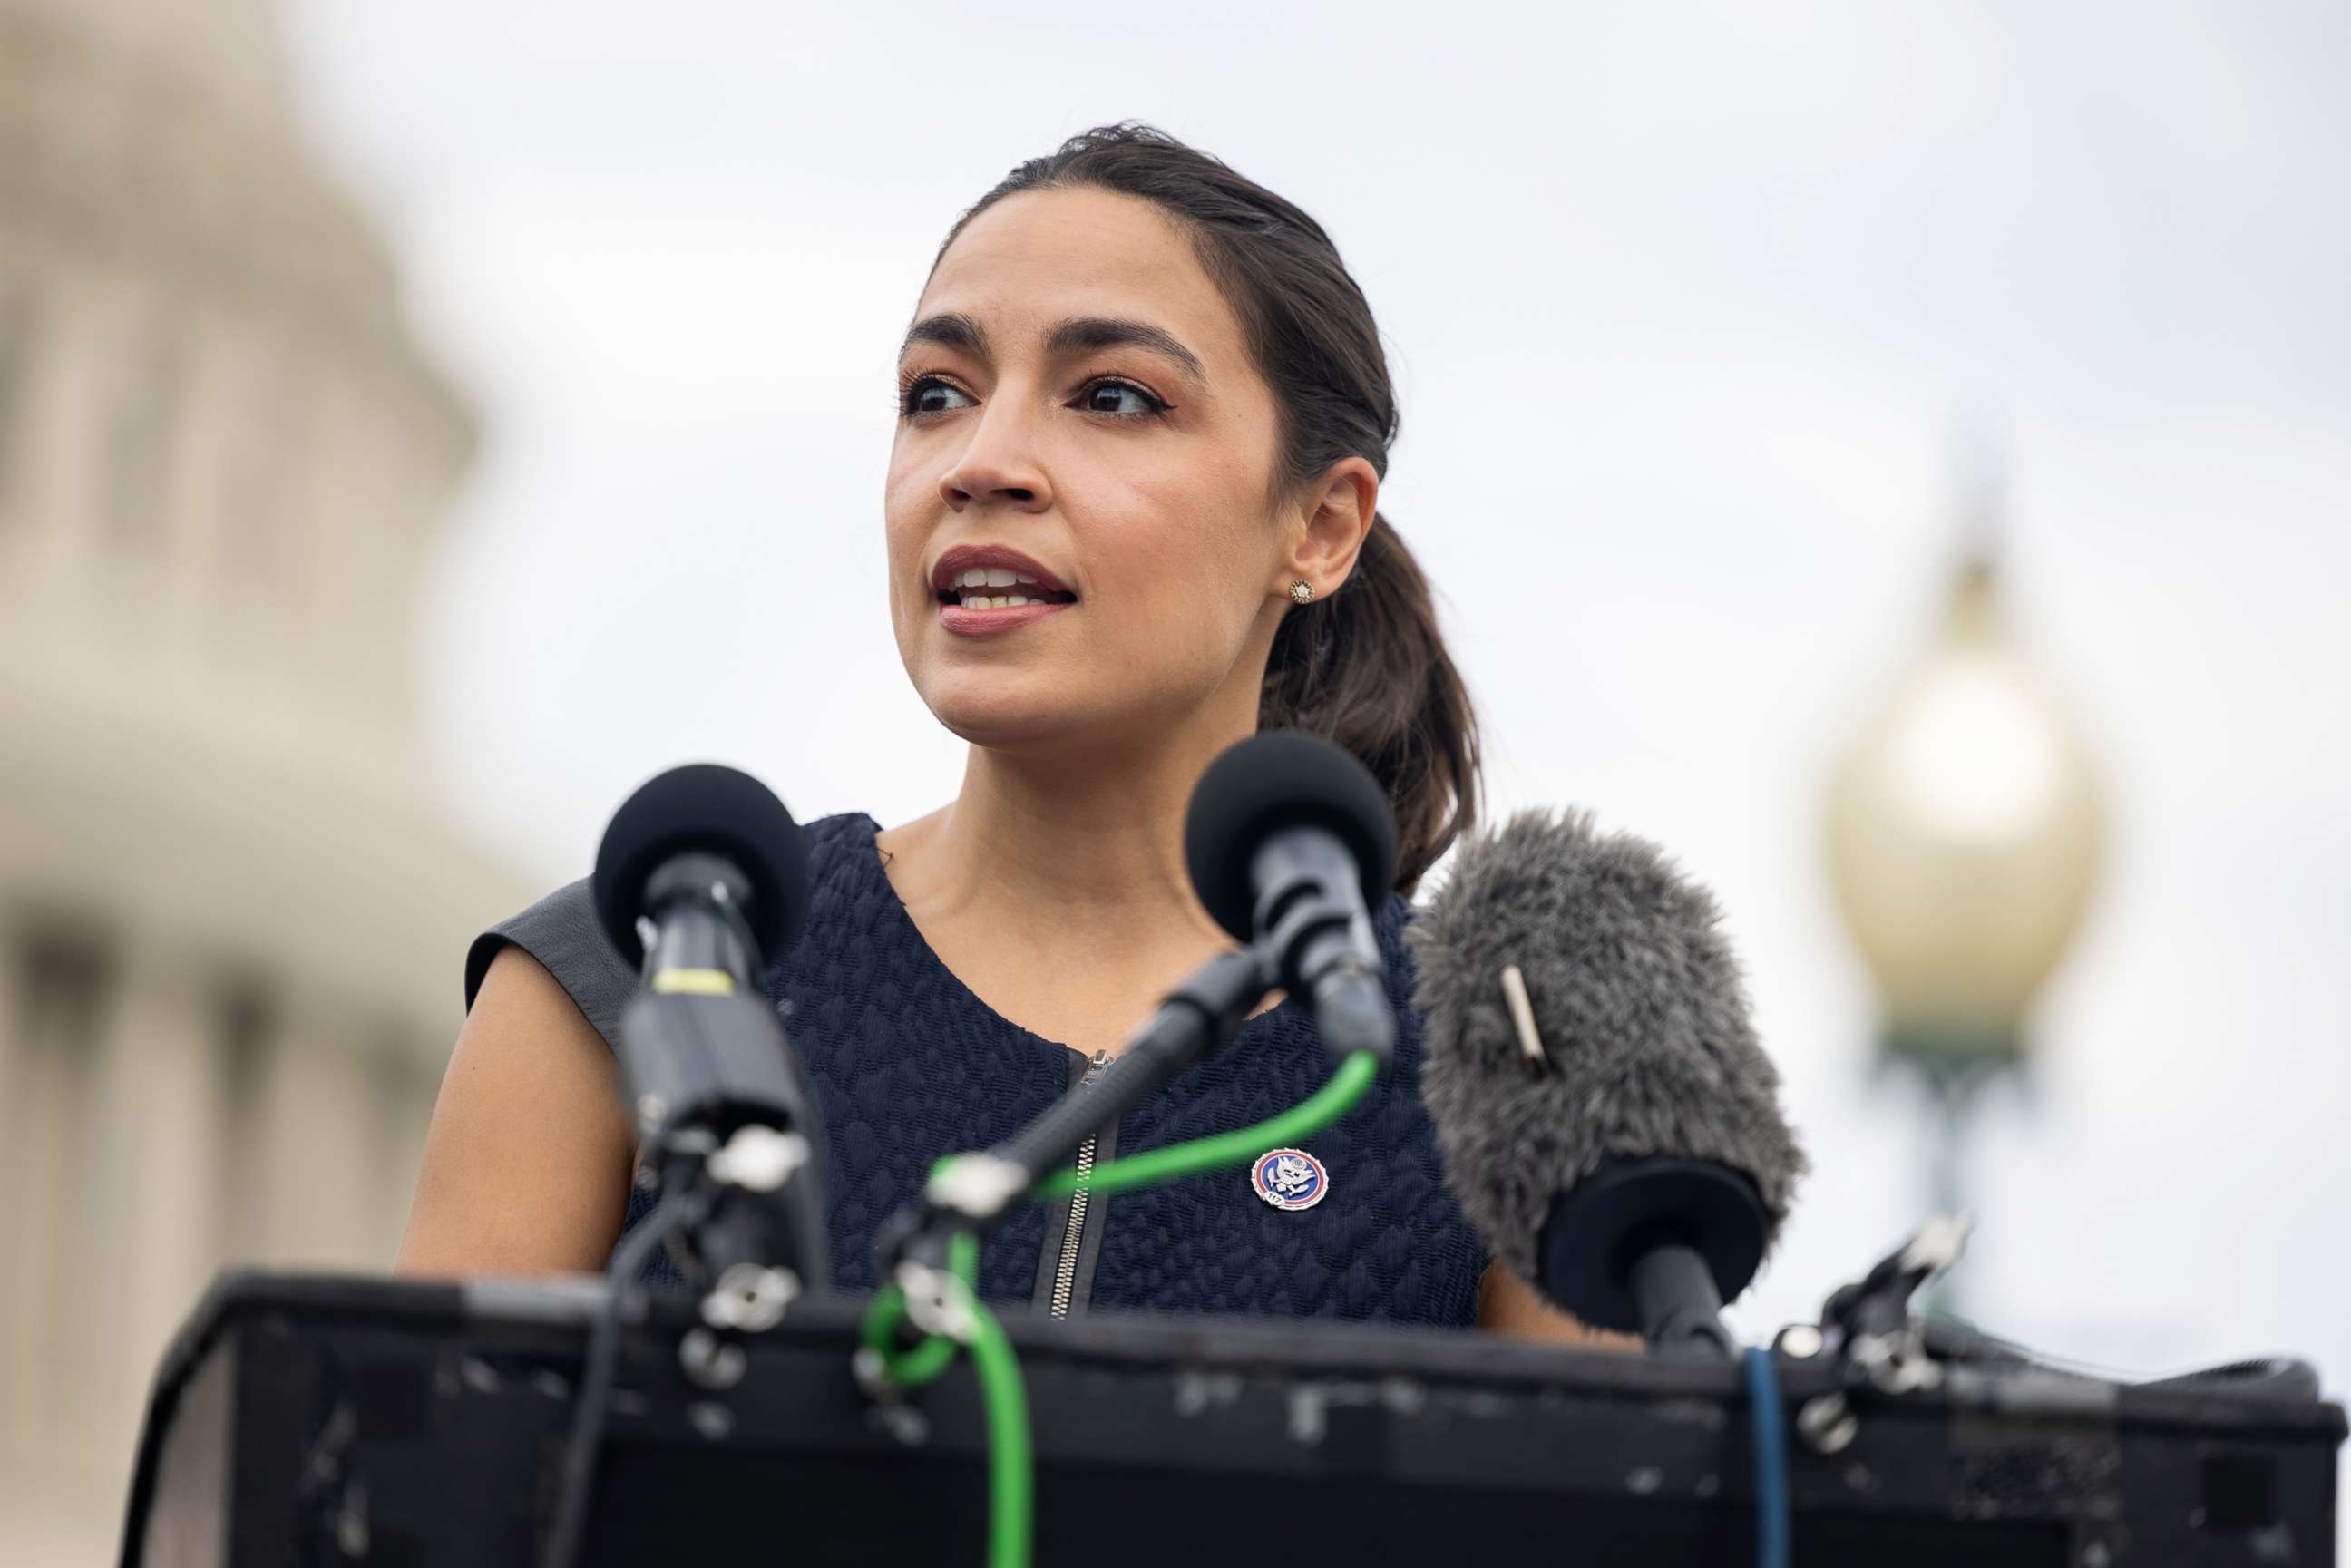 PHOTO: File image of Rep. Alexandria Ocasio-Cortez (D-NY) speaking in front of the U.S. Capitol on July 28, 2022 in Washington, D.C.